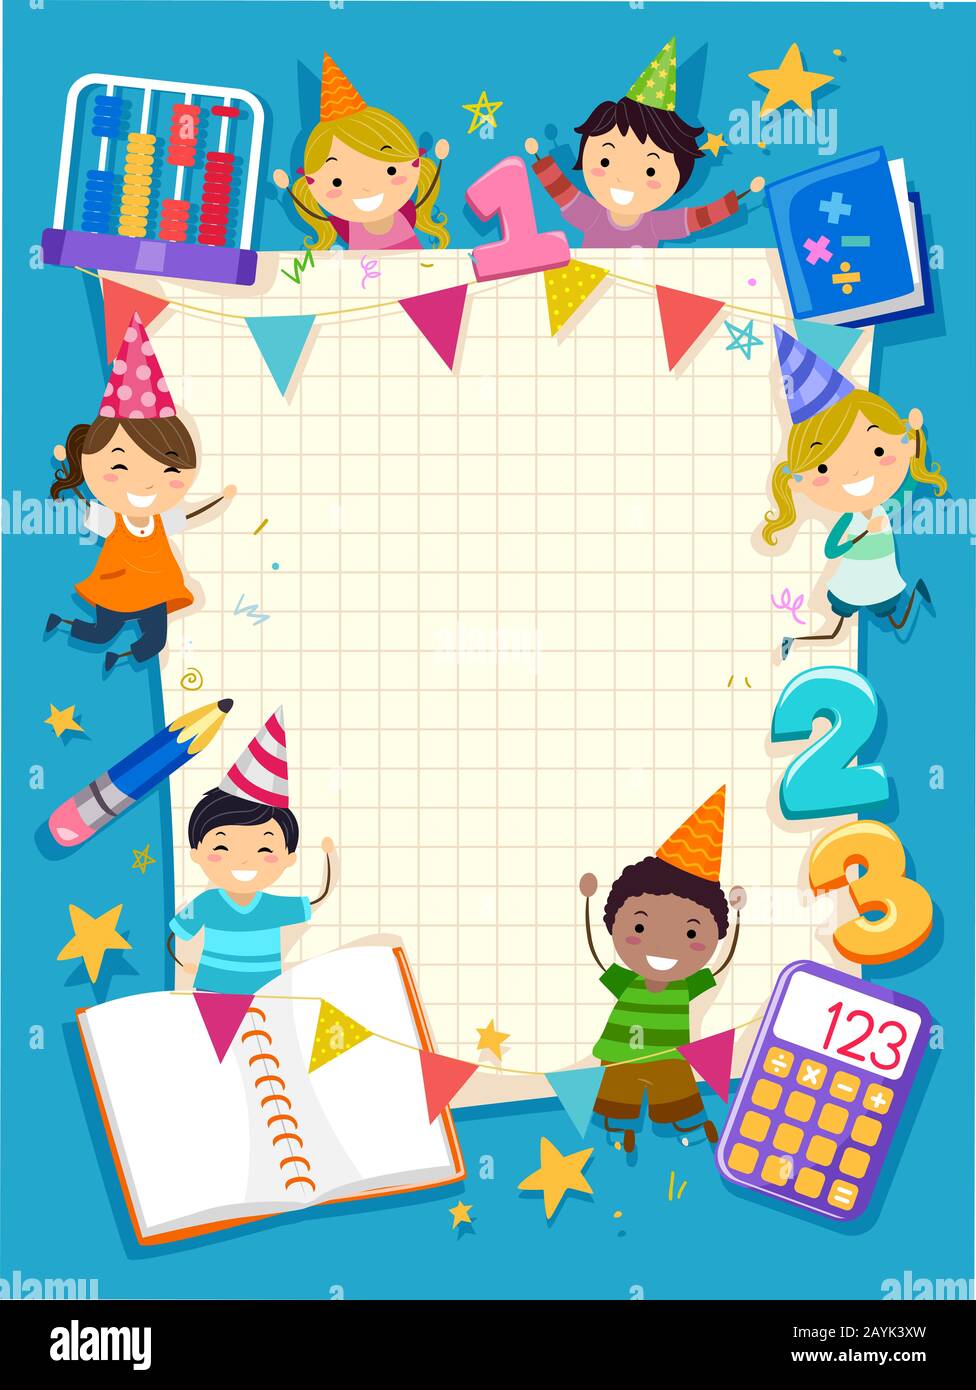 Illustration of Stickman Kids Student Wearing Party Hats with Numbers, Abacus, Calculator, Graphing Paper and Book Stock Photo